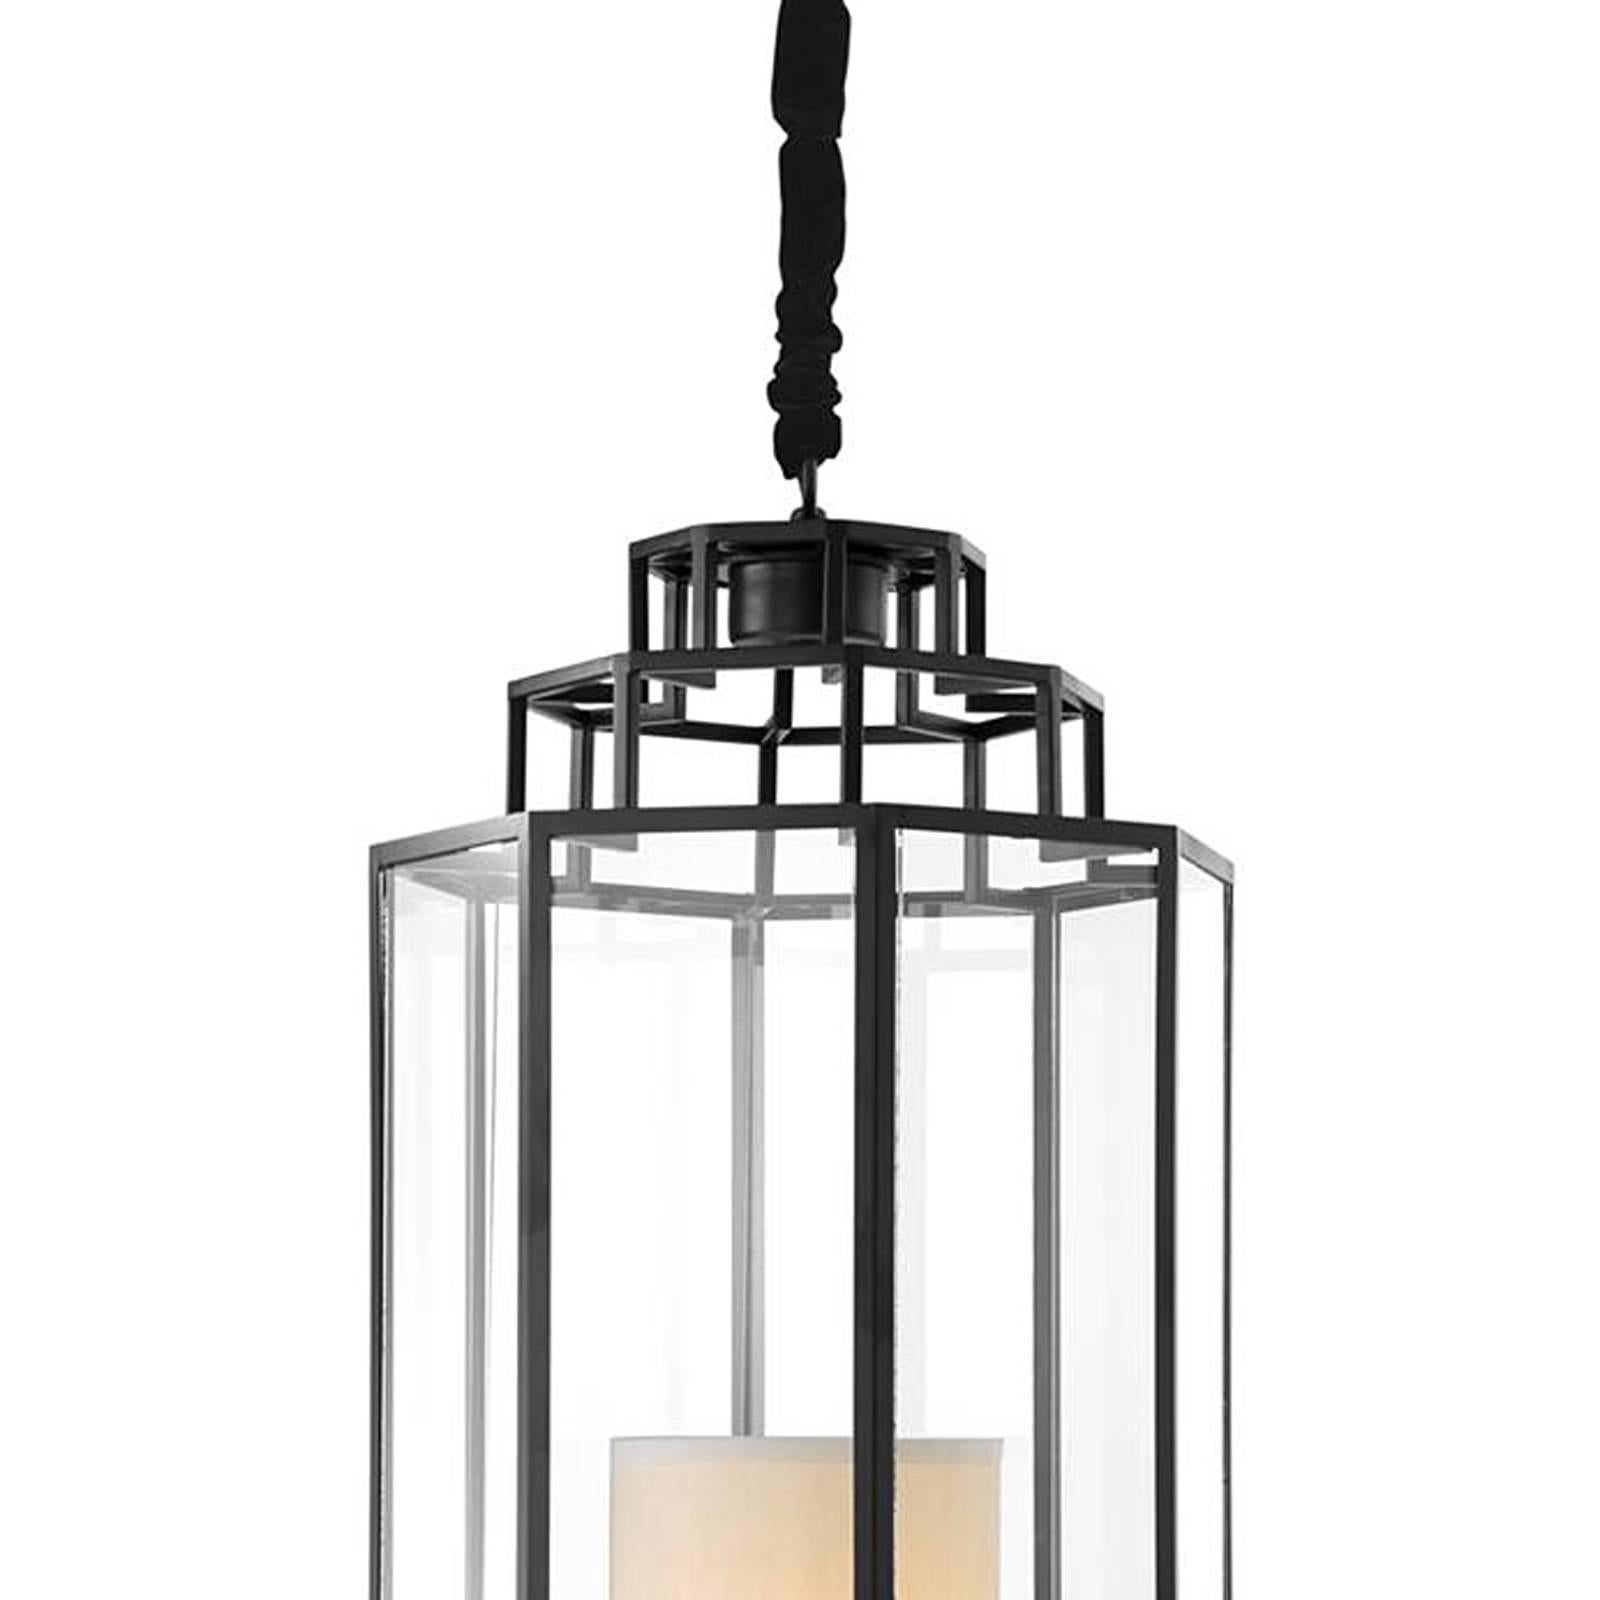 Lantern Robello with structure in iron black finish,
clear glass and cream lampshade. One bulb lamp holder
type E27, max 40 watt. Bulb not included.
Adjustable chain: 150cm.
Measures: Ø 40 x H 83 cm, price 1650,00€
Ø 32.5 x H 69 cm, price